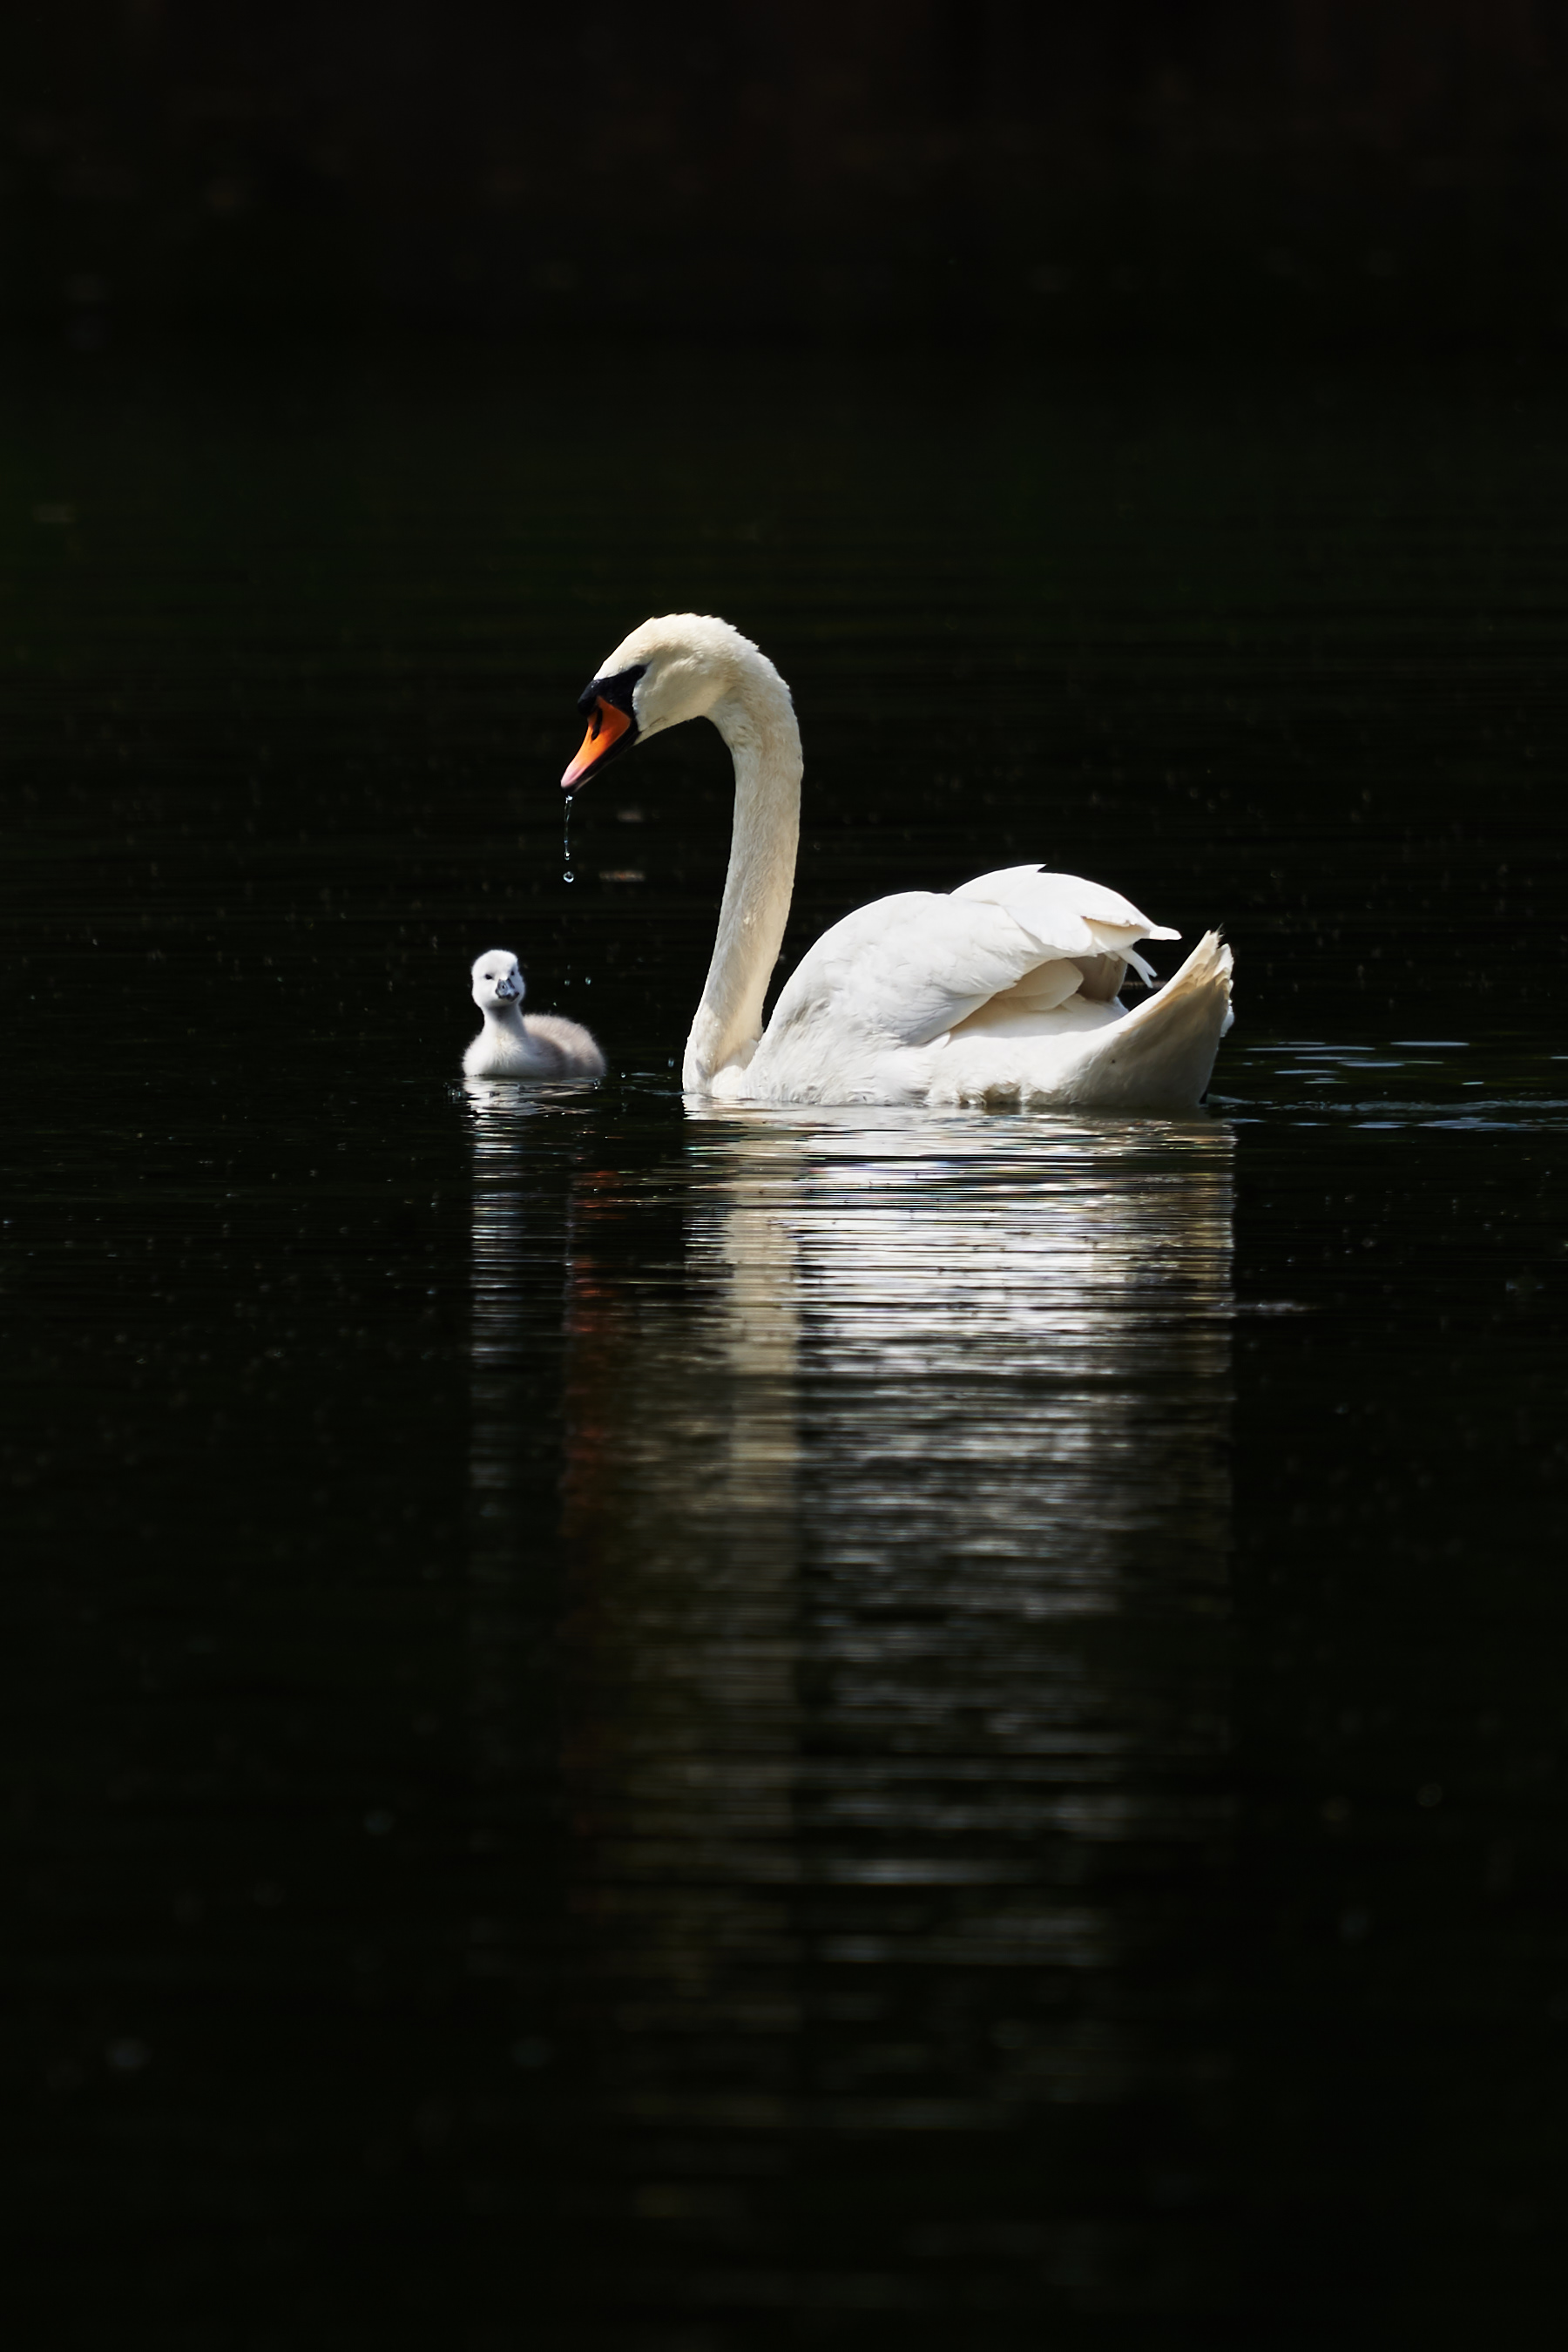 125551 free wallpaper 240x320 for phone, download images water, animals, swan, birds 240x320 for mobile